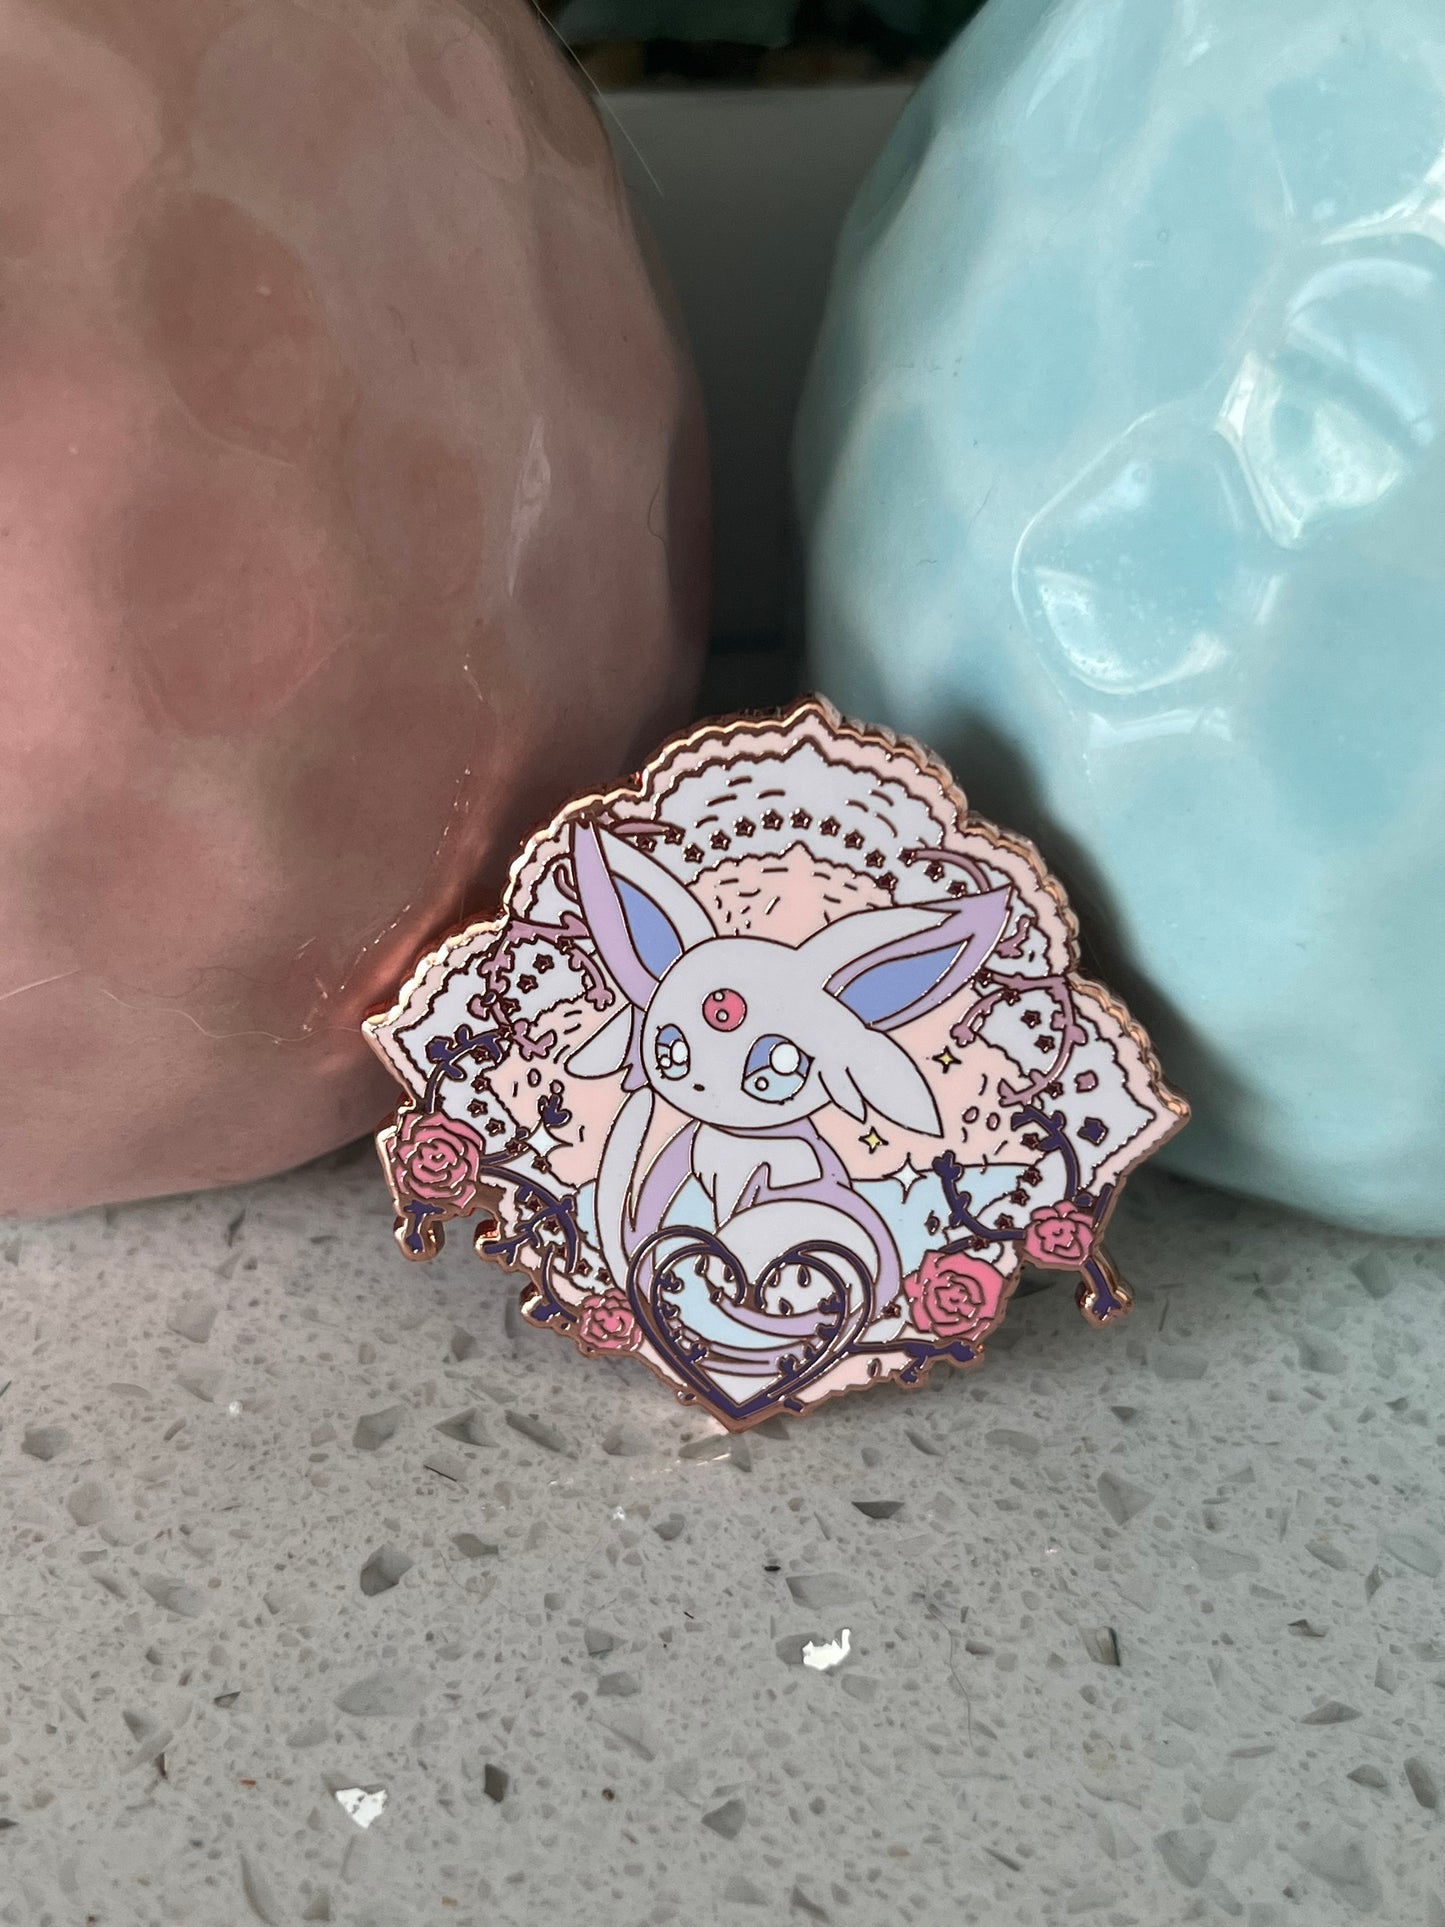 Espeon Hard Enamel Pin  Eeveelutions  "Lace & Flowers" Collection